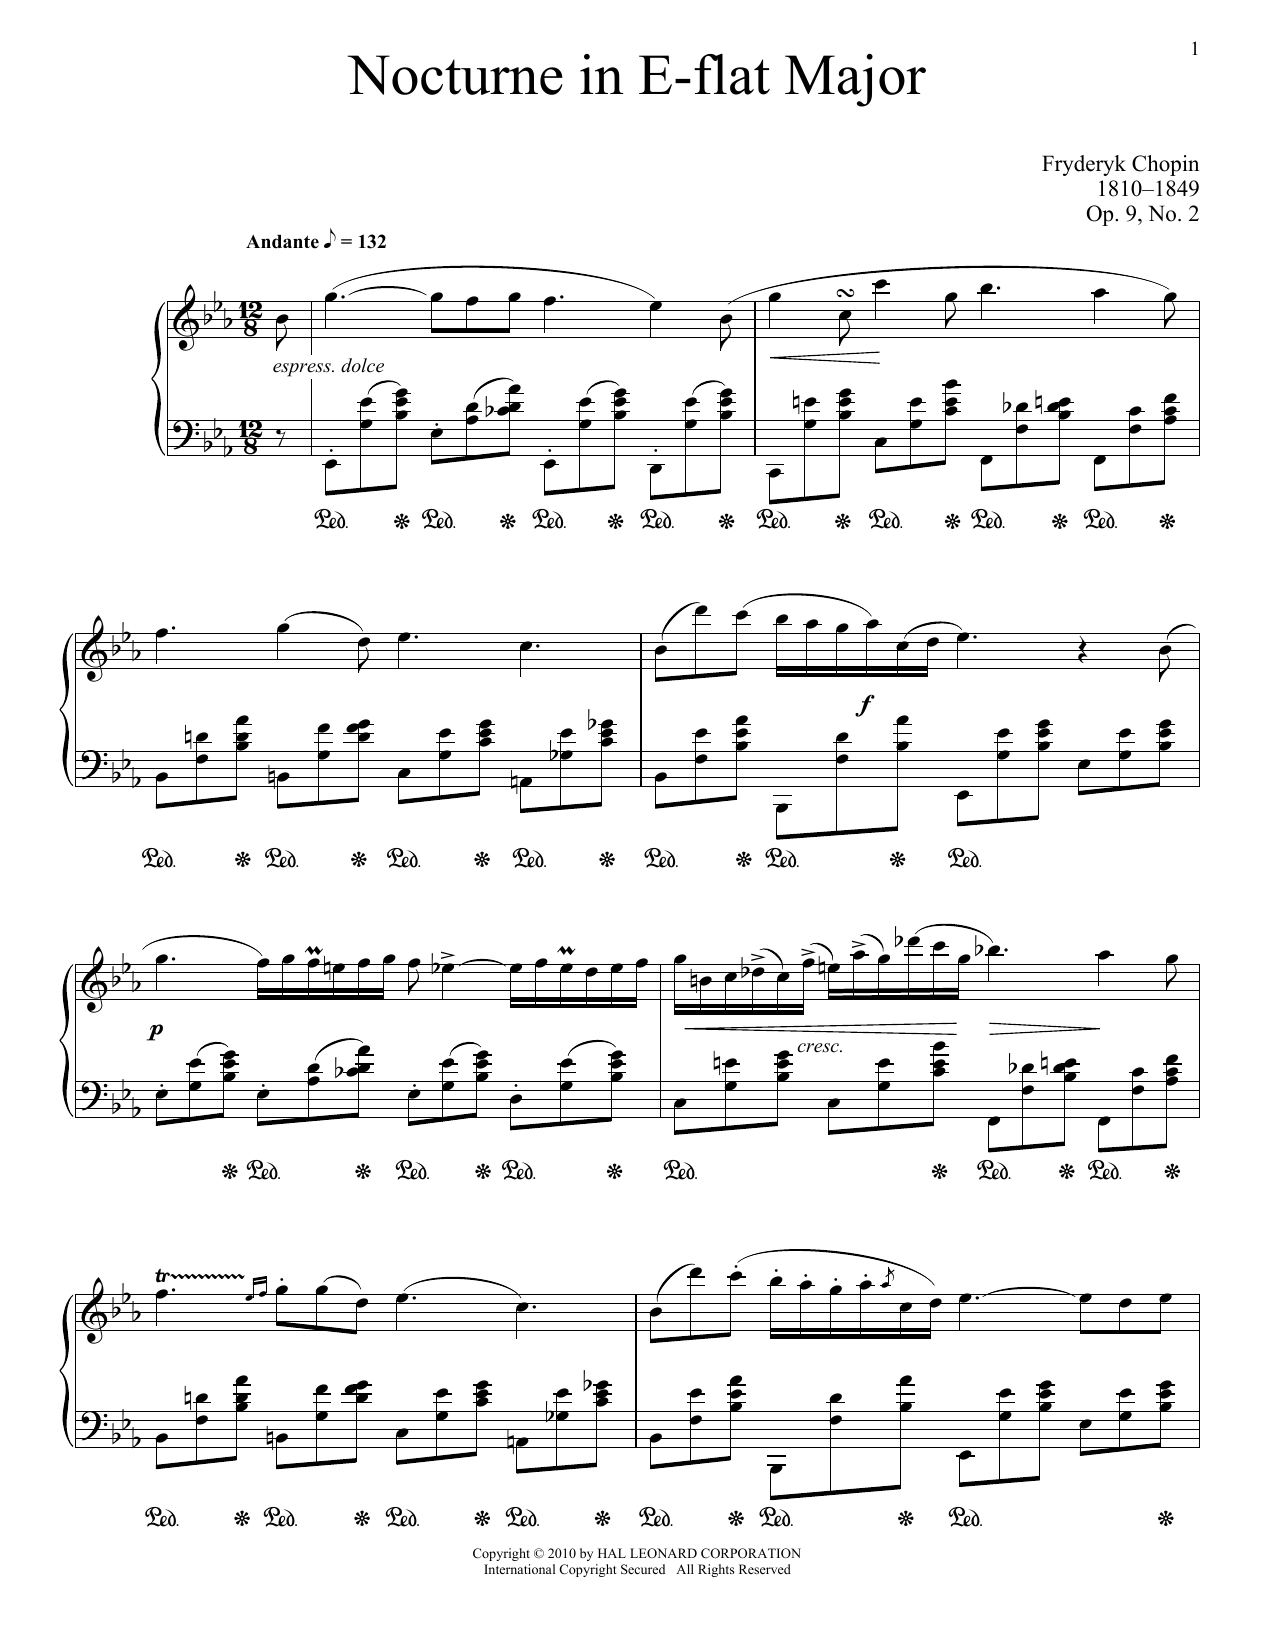 Download Frederic Chopin Nocturne in E-flat Major, Op. 9, No. 2 Sheet Music